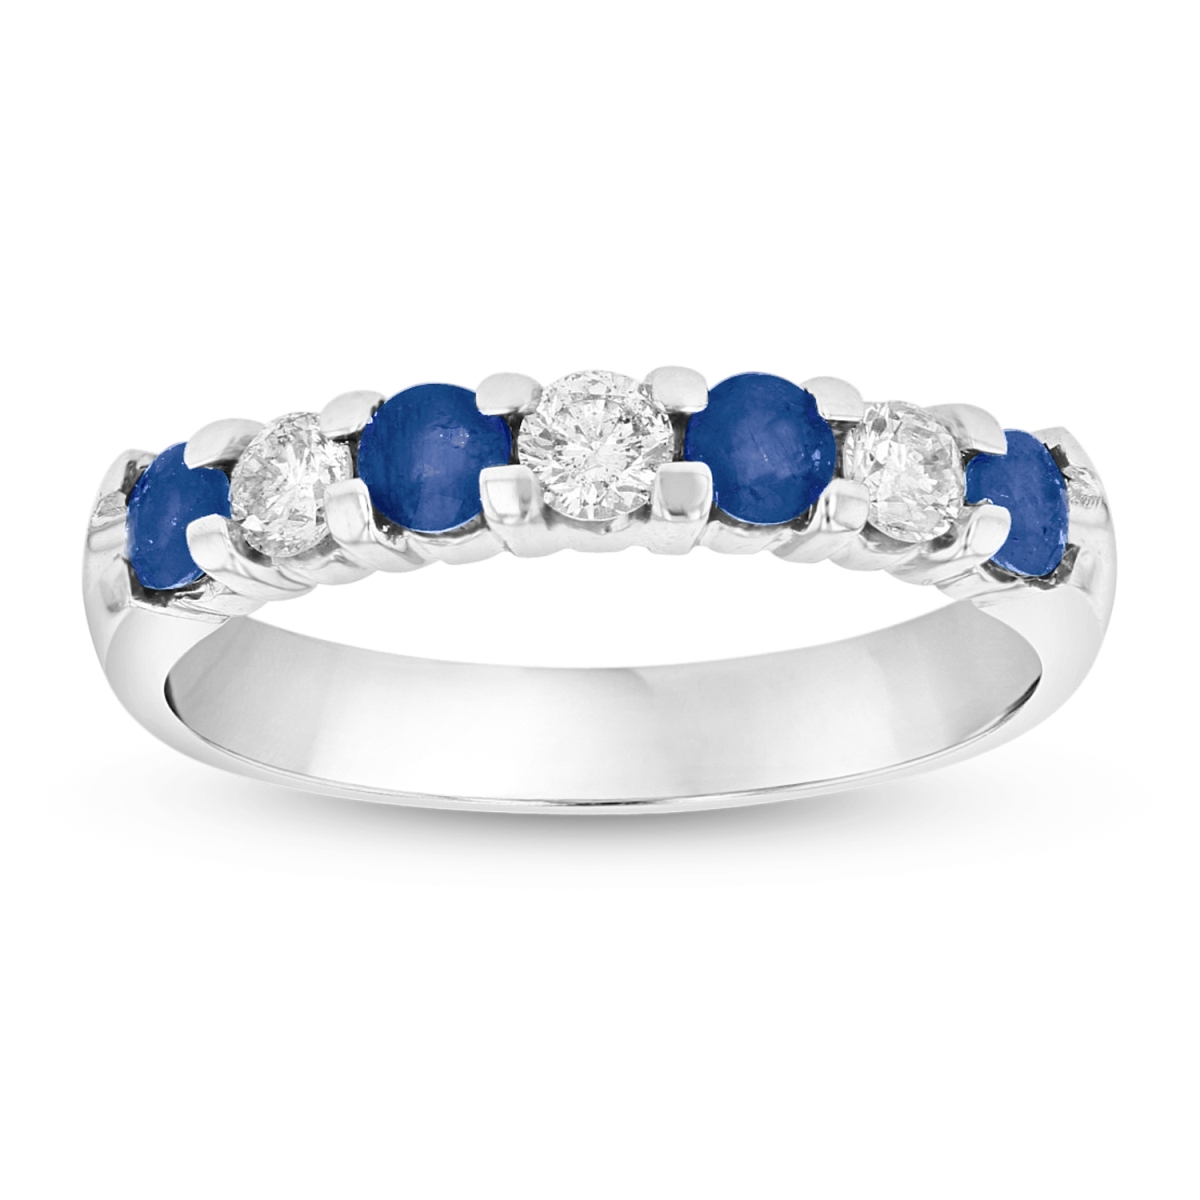 Picture of Louis Creations RL887SD-033-9 14K Gold 0.78 CTTW Round Diamonds & Sapphires Prong Set Band Ring - Size 9